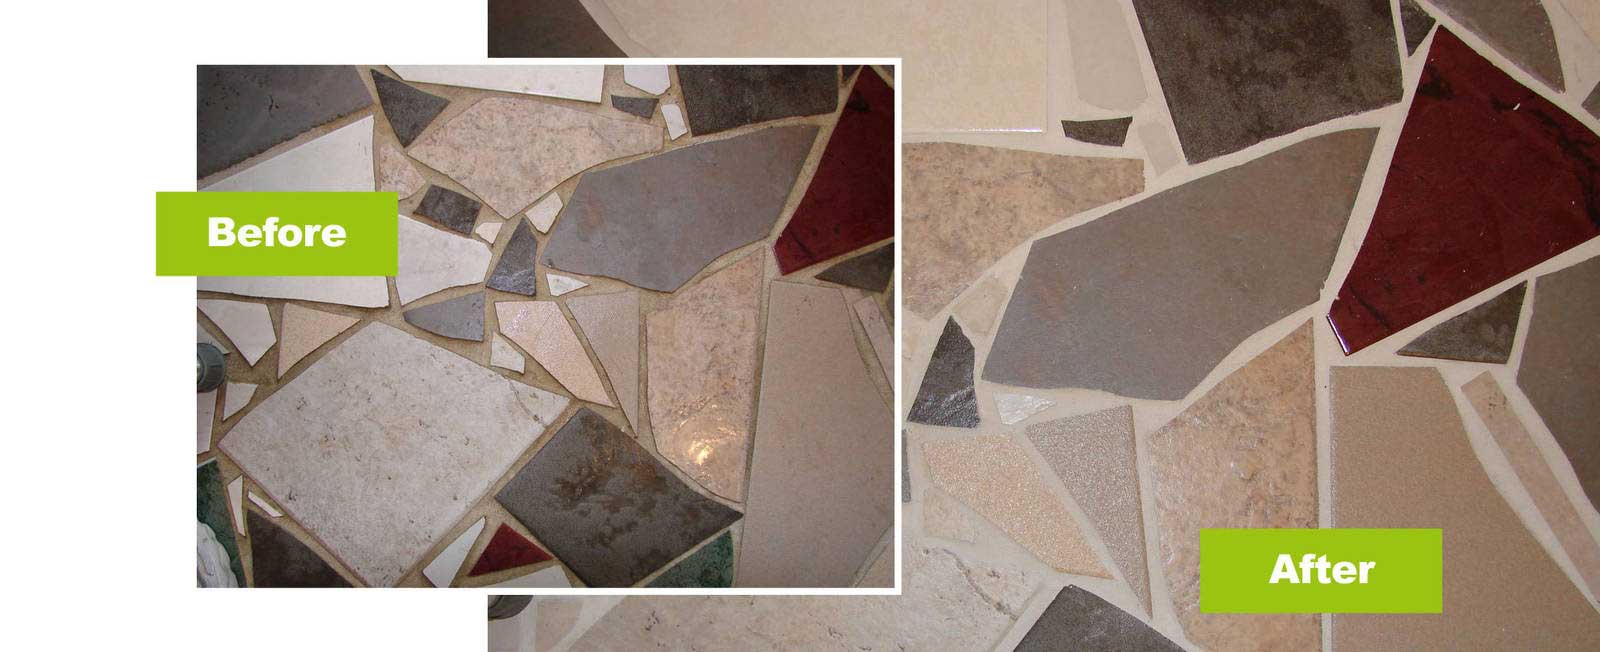 Enviro Clean can make your grout look this good with our quality grout sealing treatment.